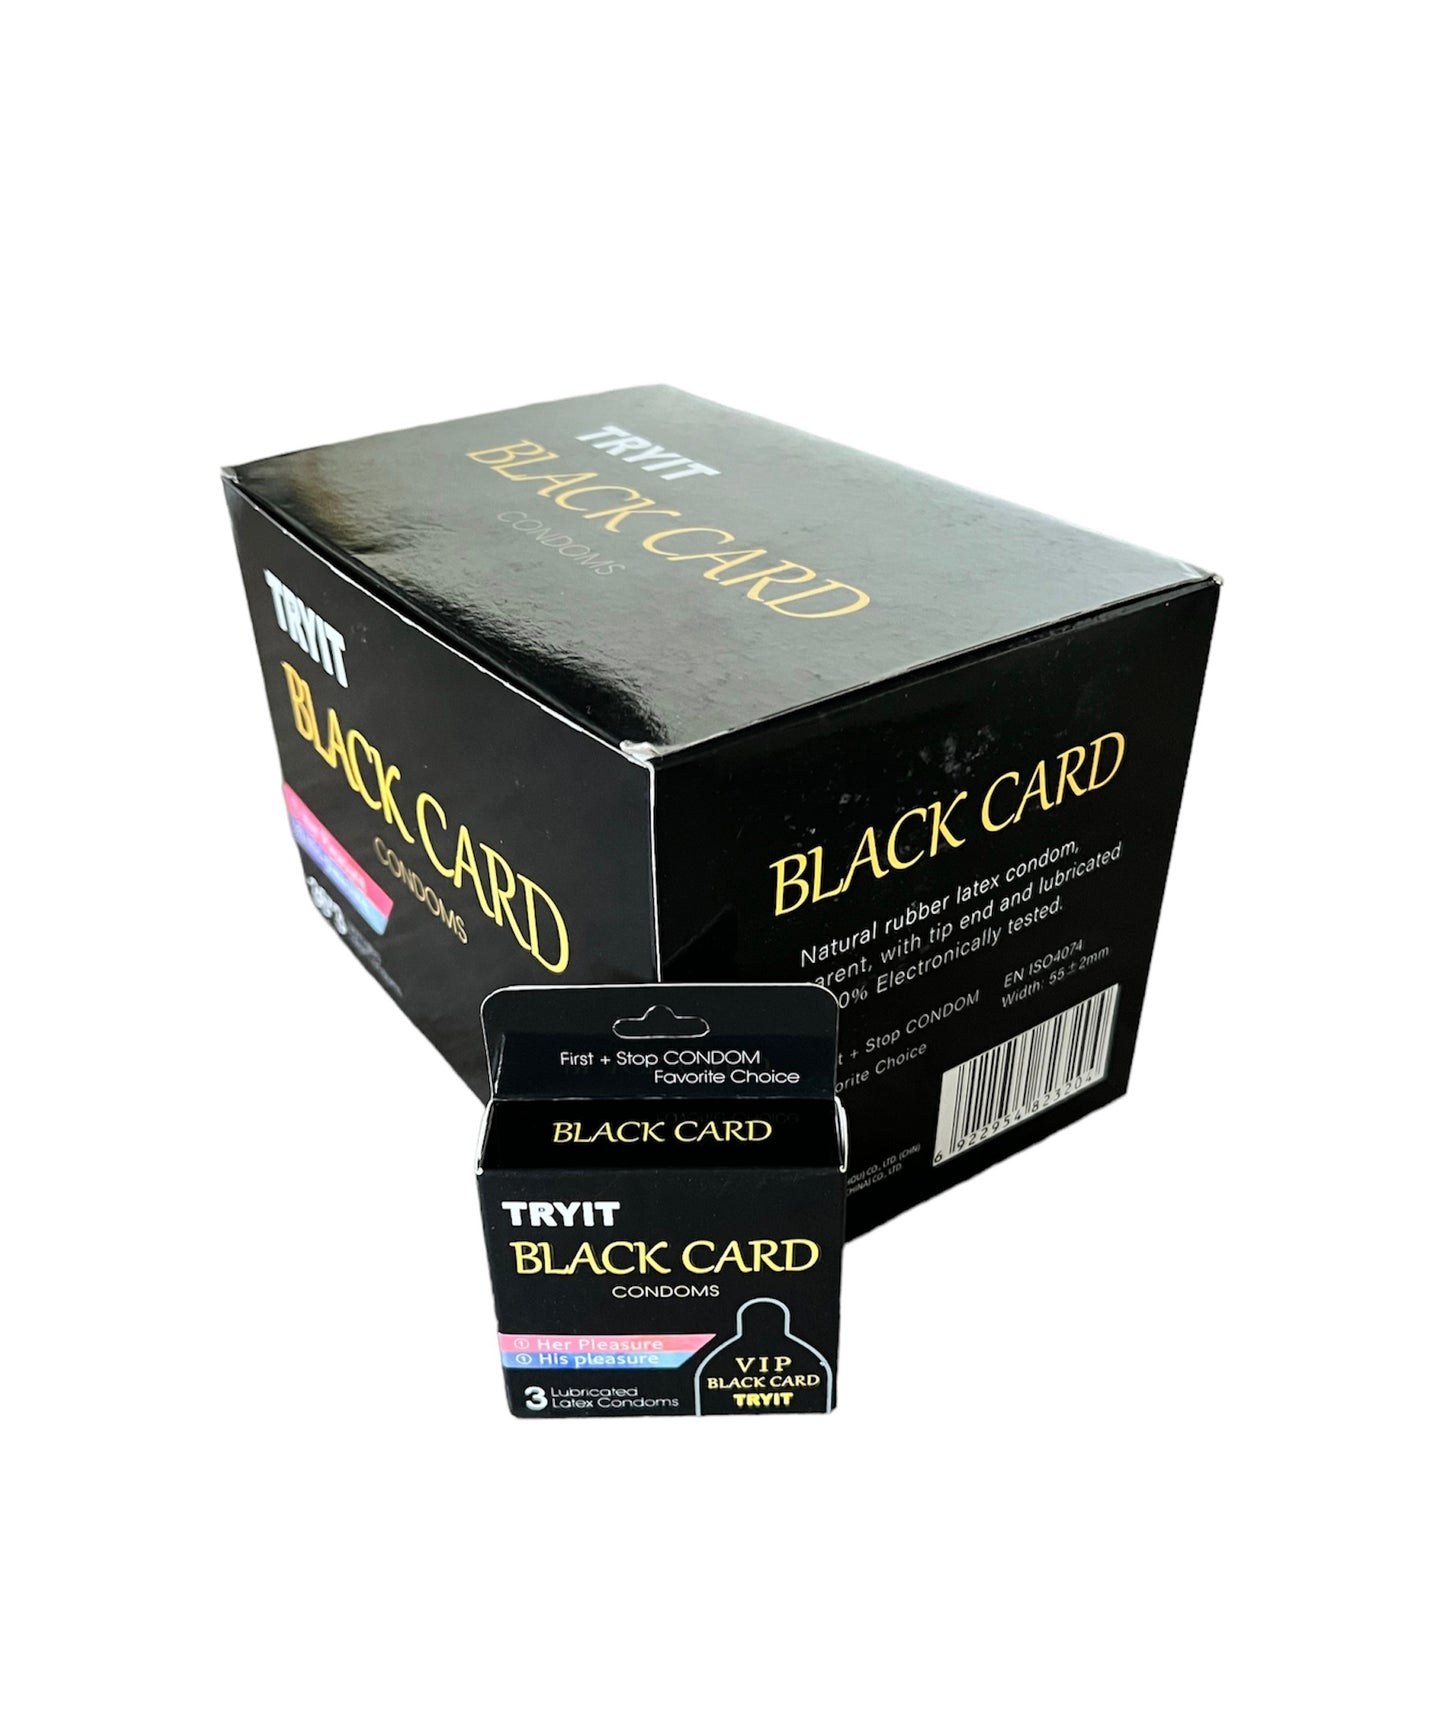 TRYIT Black Card Condoms 36 Packs of 3